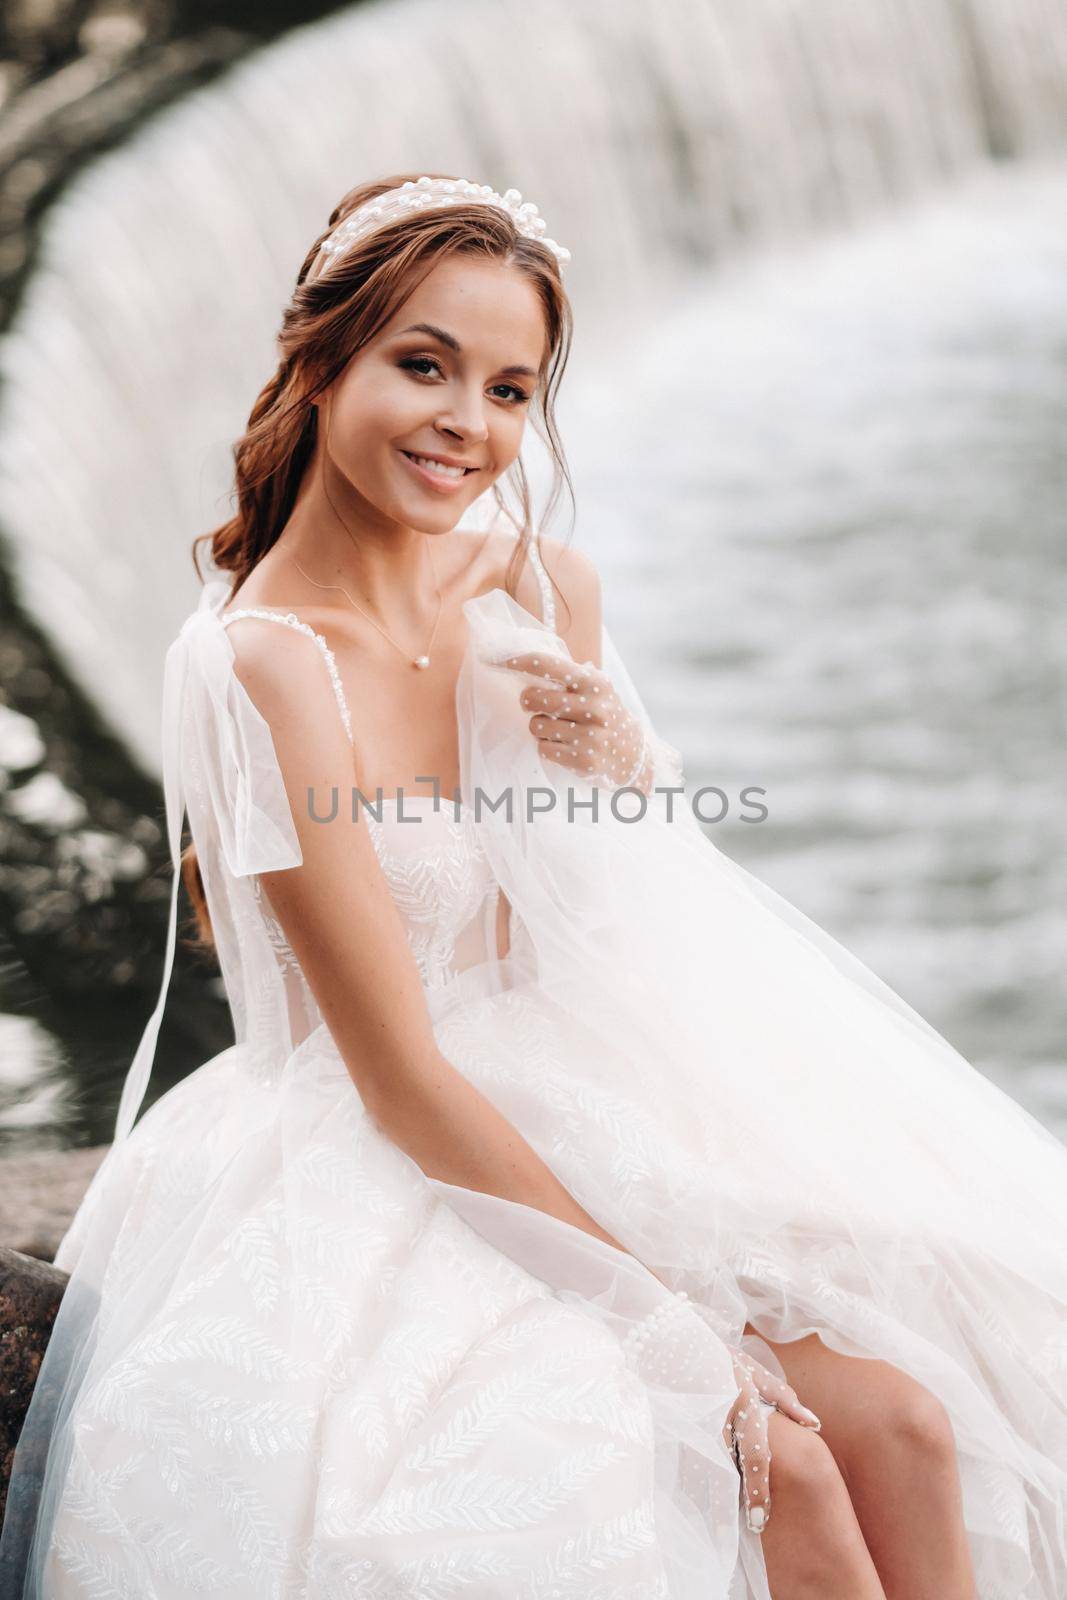 An elegant bride in a white dress, gloves and bare feet is sitting near a waterfall in the Park enjoying nature.A model in a wedding dress and gloves at a nature Park.Belarus.